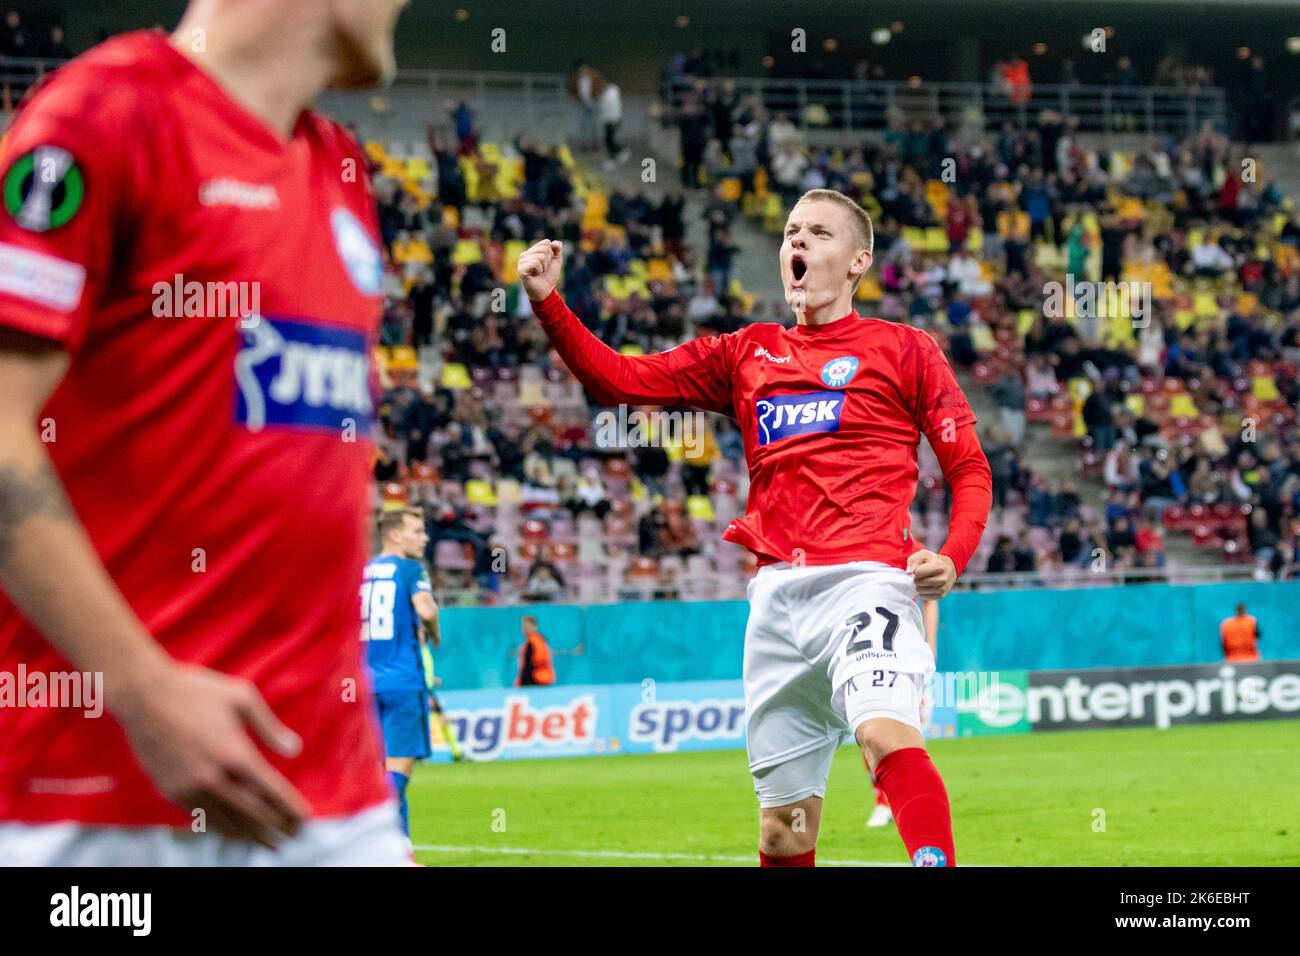 Bucharest, Romania. 14th Oct, 2022. October 14, 2022: Sebastian Jorgensen #27 of Silkeborg IF celebrating the 5th goal during of the UEFA Europa Conference League group B match between FCSB Bucharest and Silkeborg IF at National Arena Stadium in Bucharest, Romania ROU. Catalin Soare/Cronos Credit: Cronos/Alamy Live News Stock Photo